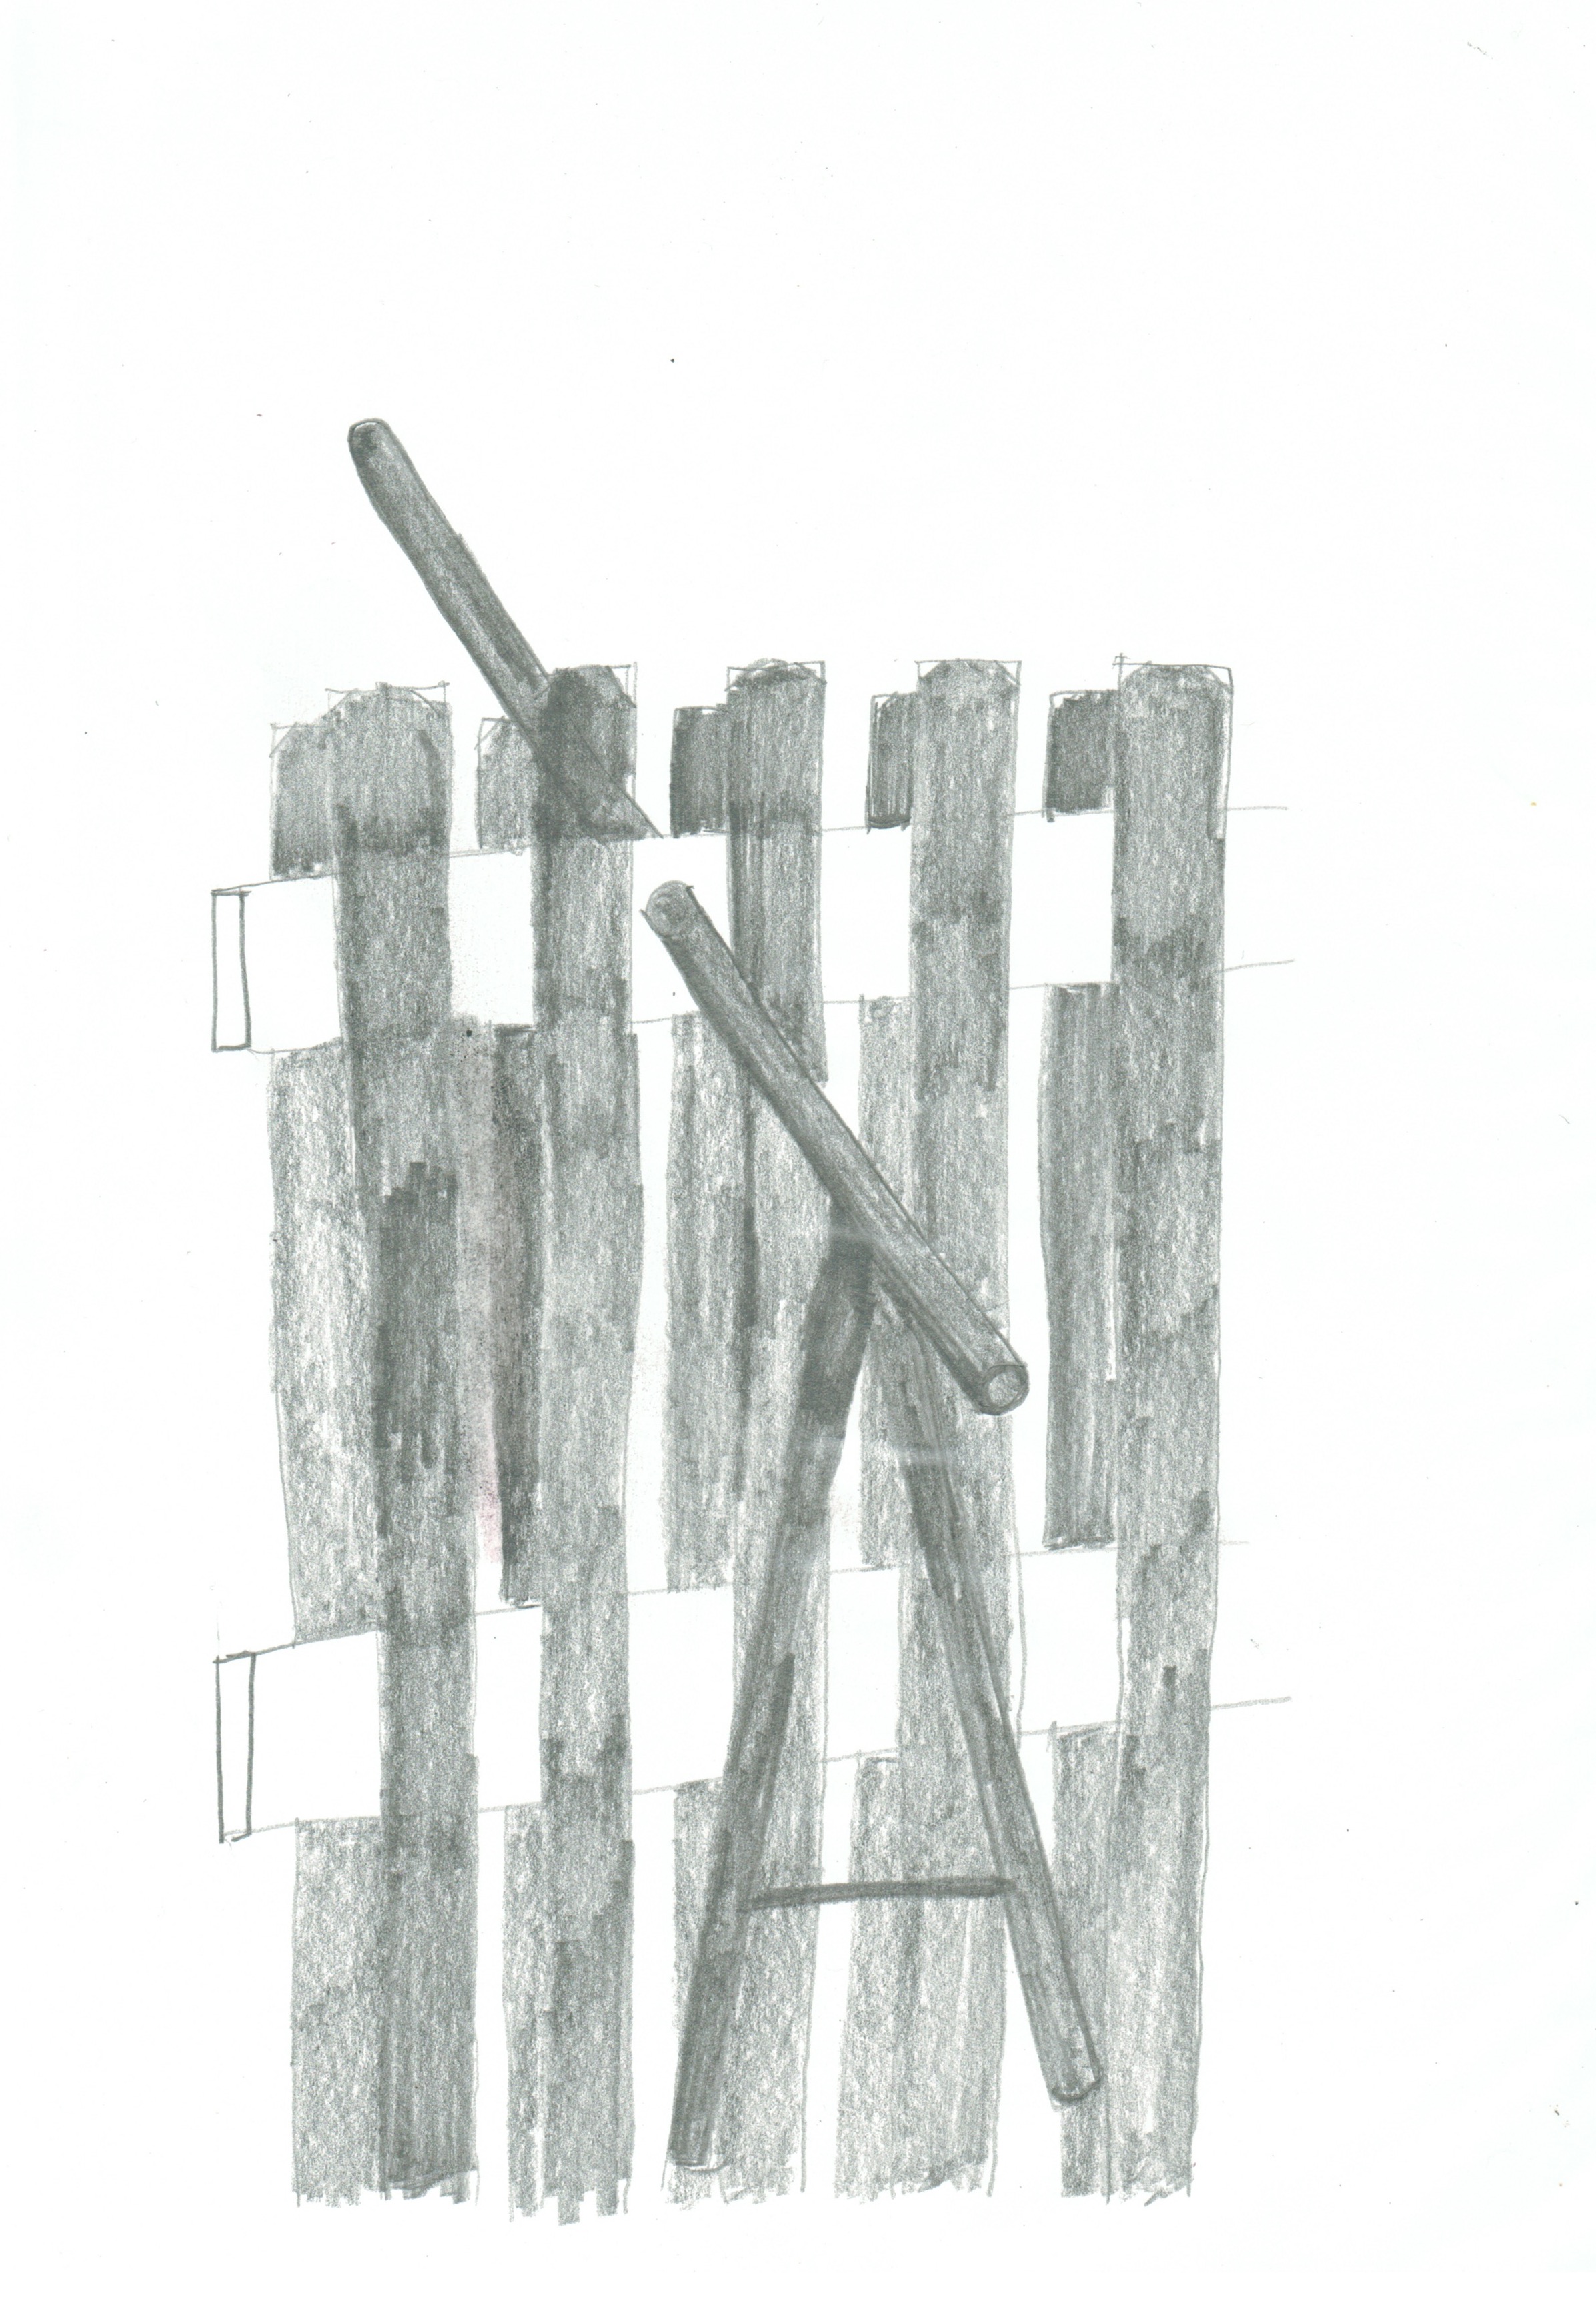 pencil drawing of a fence with a telescope-like device puncturing from one side to the other